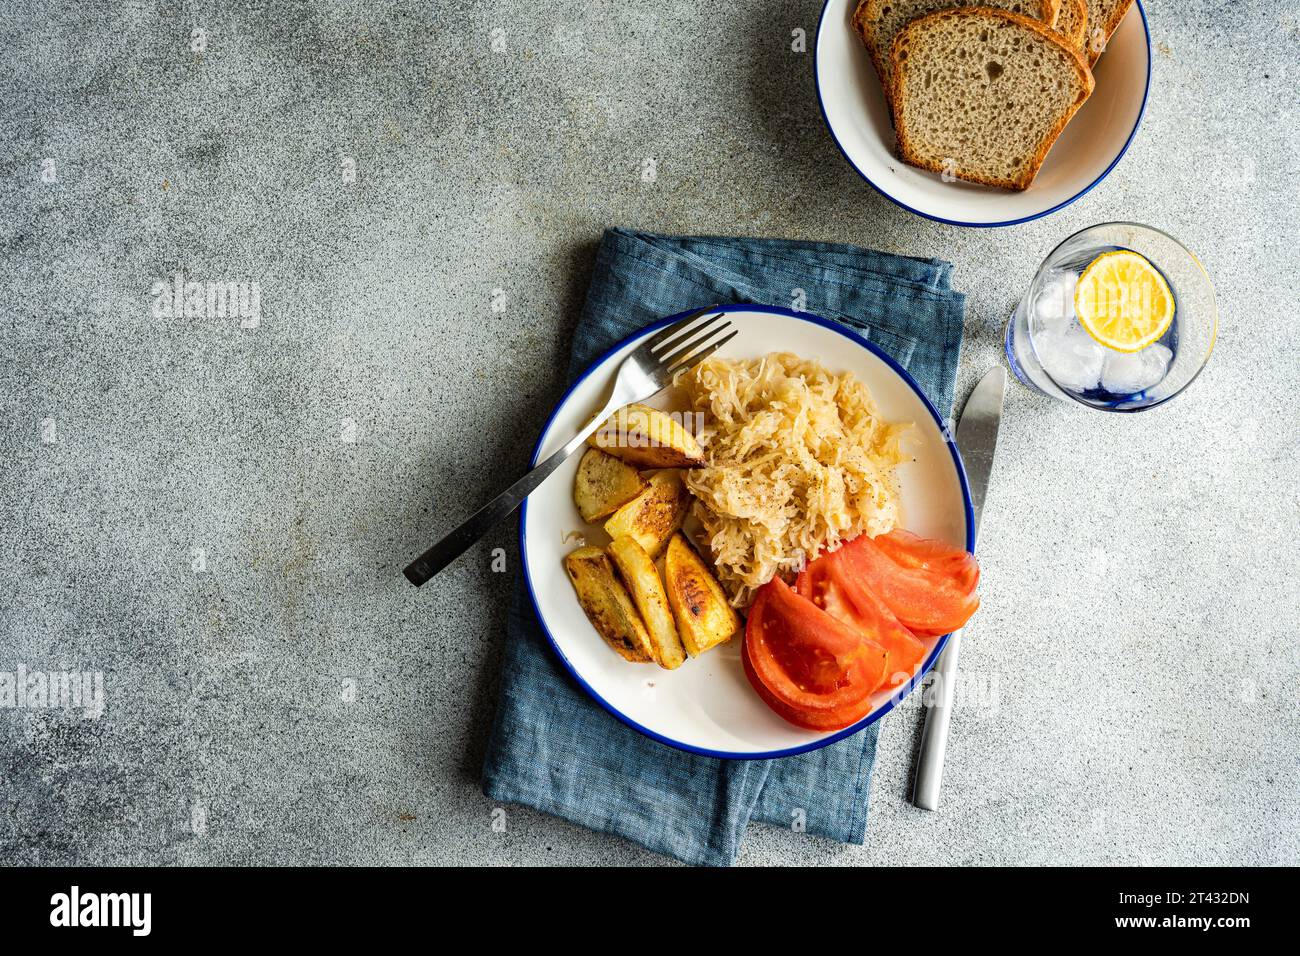 Overhead view of a fermented cabbage salad with baked potato, tomato, bread and a glass of lemon ice water Stock Photo